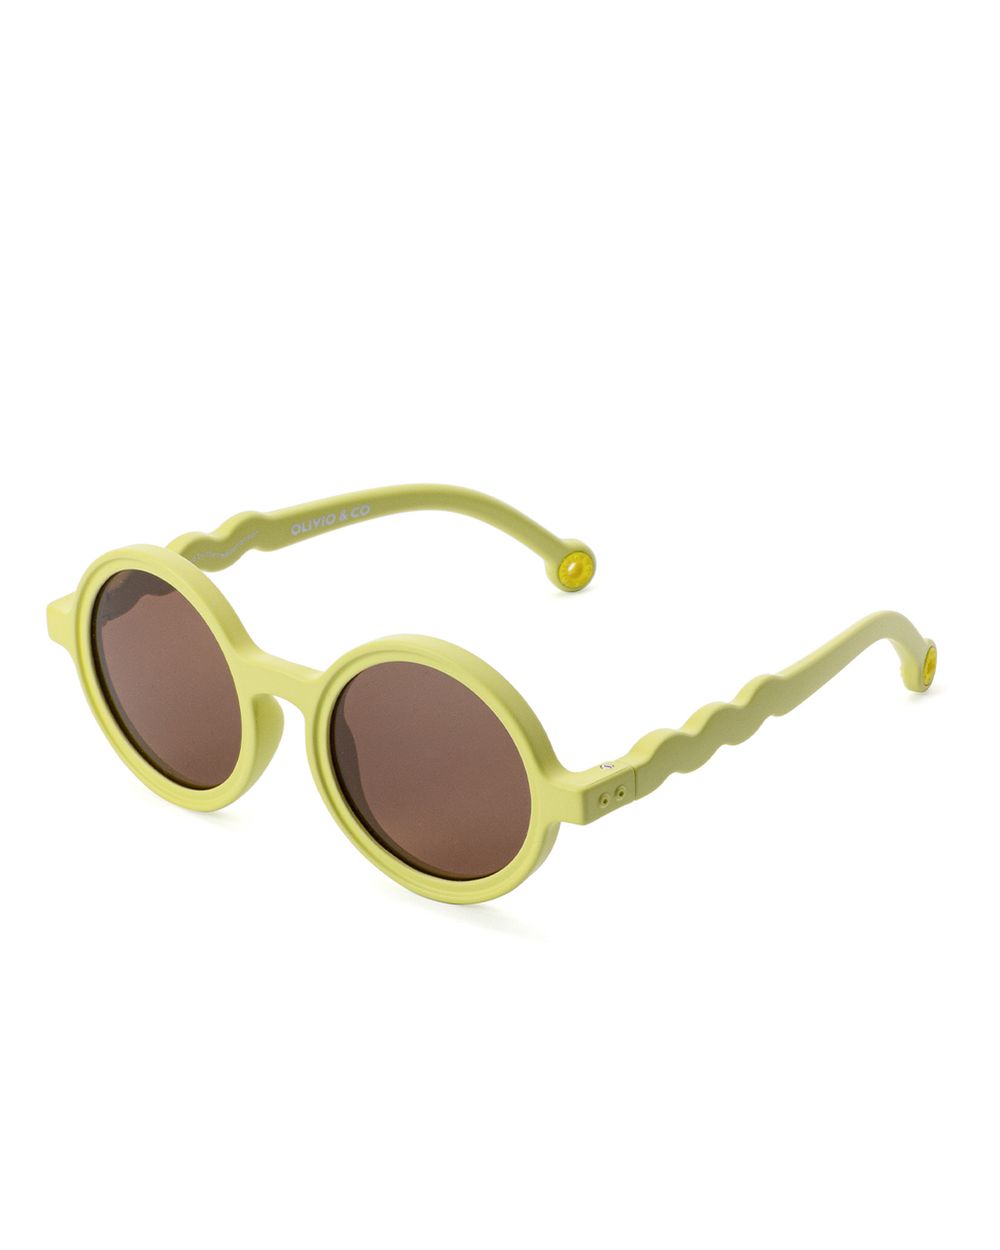 Toddler Round Sunglasses Lime Green